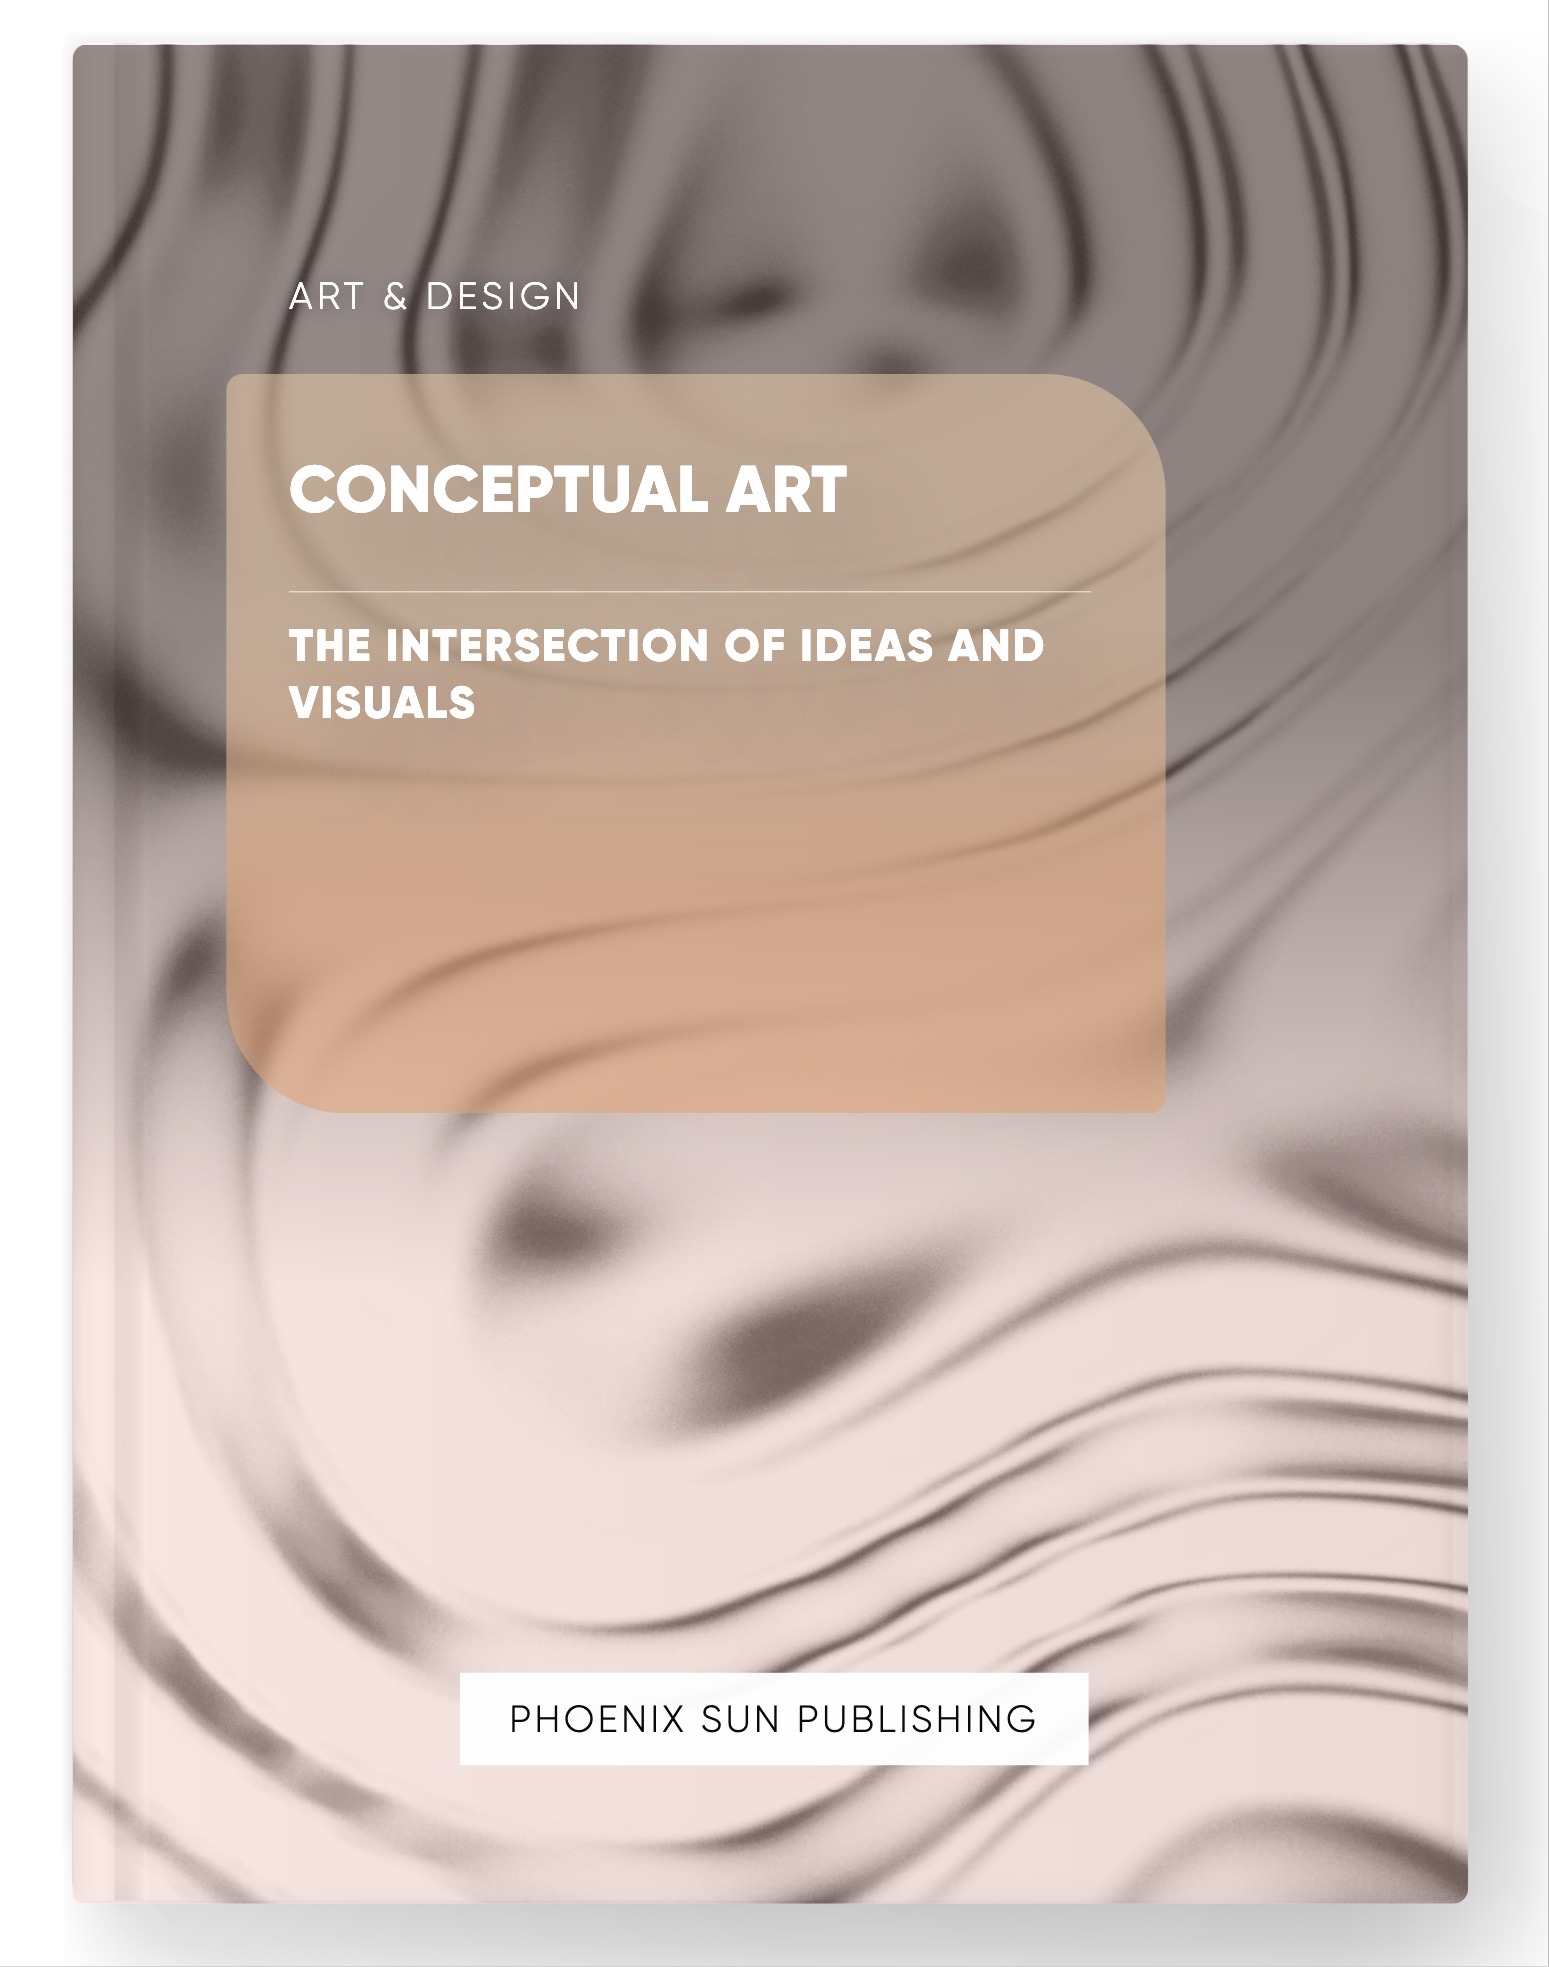 Conceptual Art – The Intersection of Ideas and Visuals